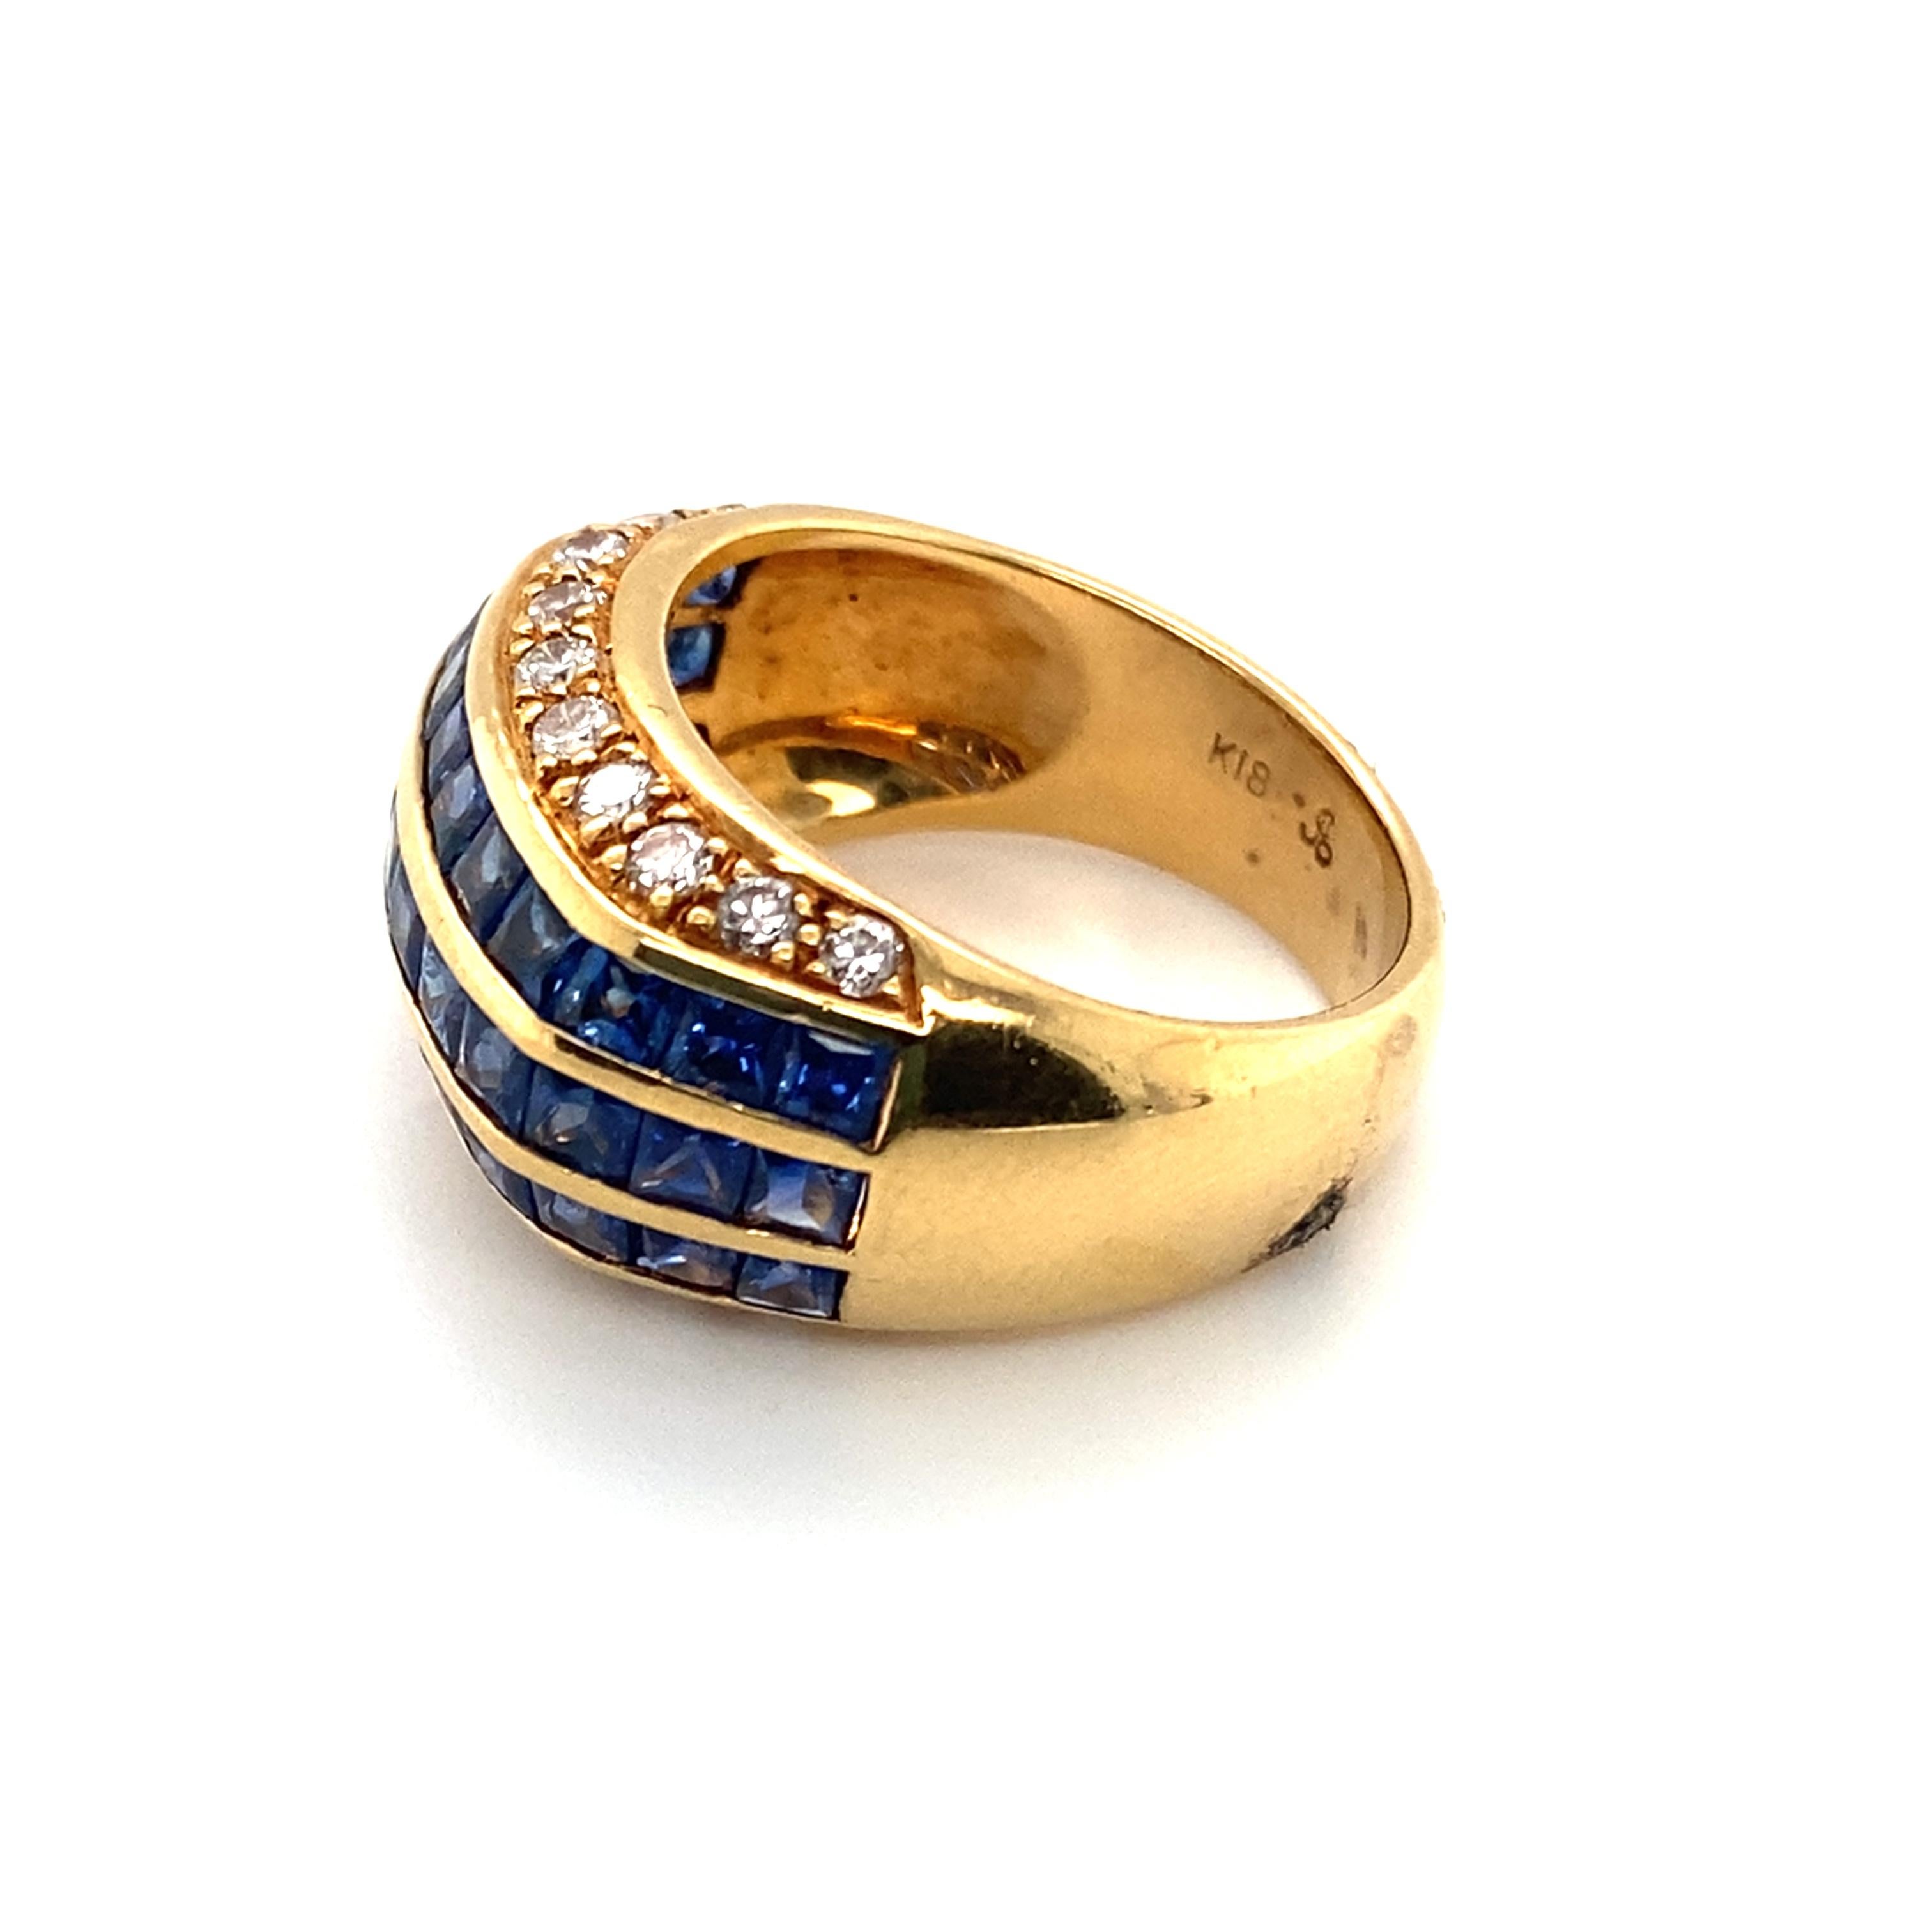 Modern 1990s 2.40 Carat Sapphire and Diamond Ring in 18 Karat Yellow Gold For Sale